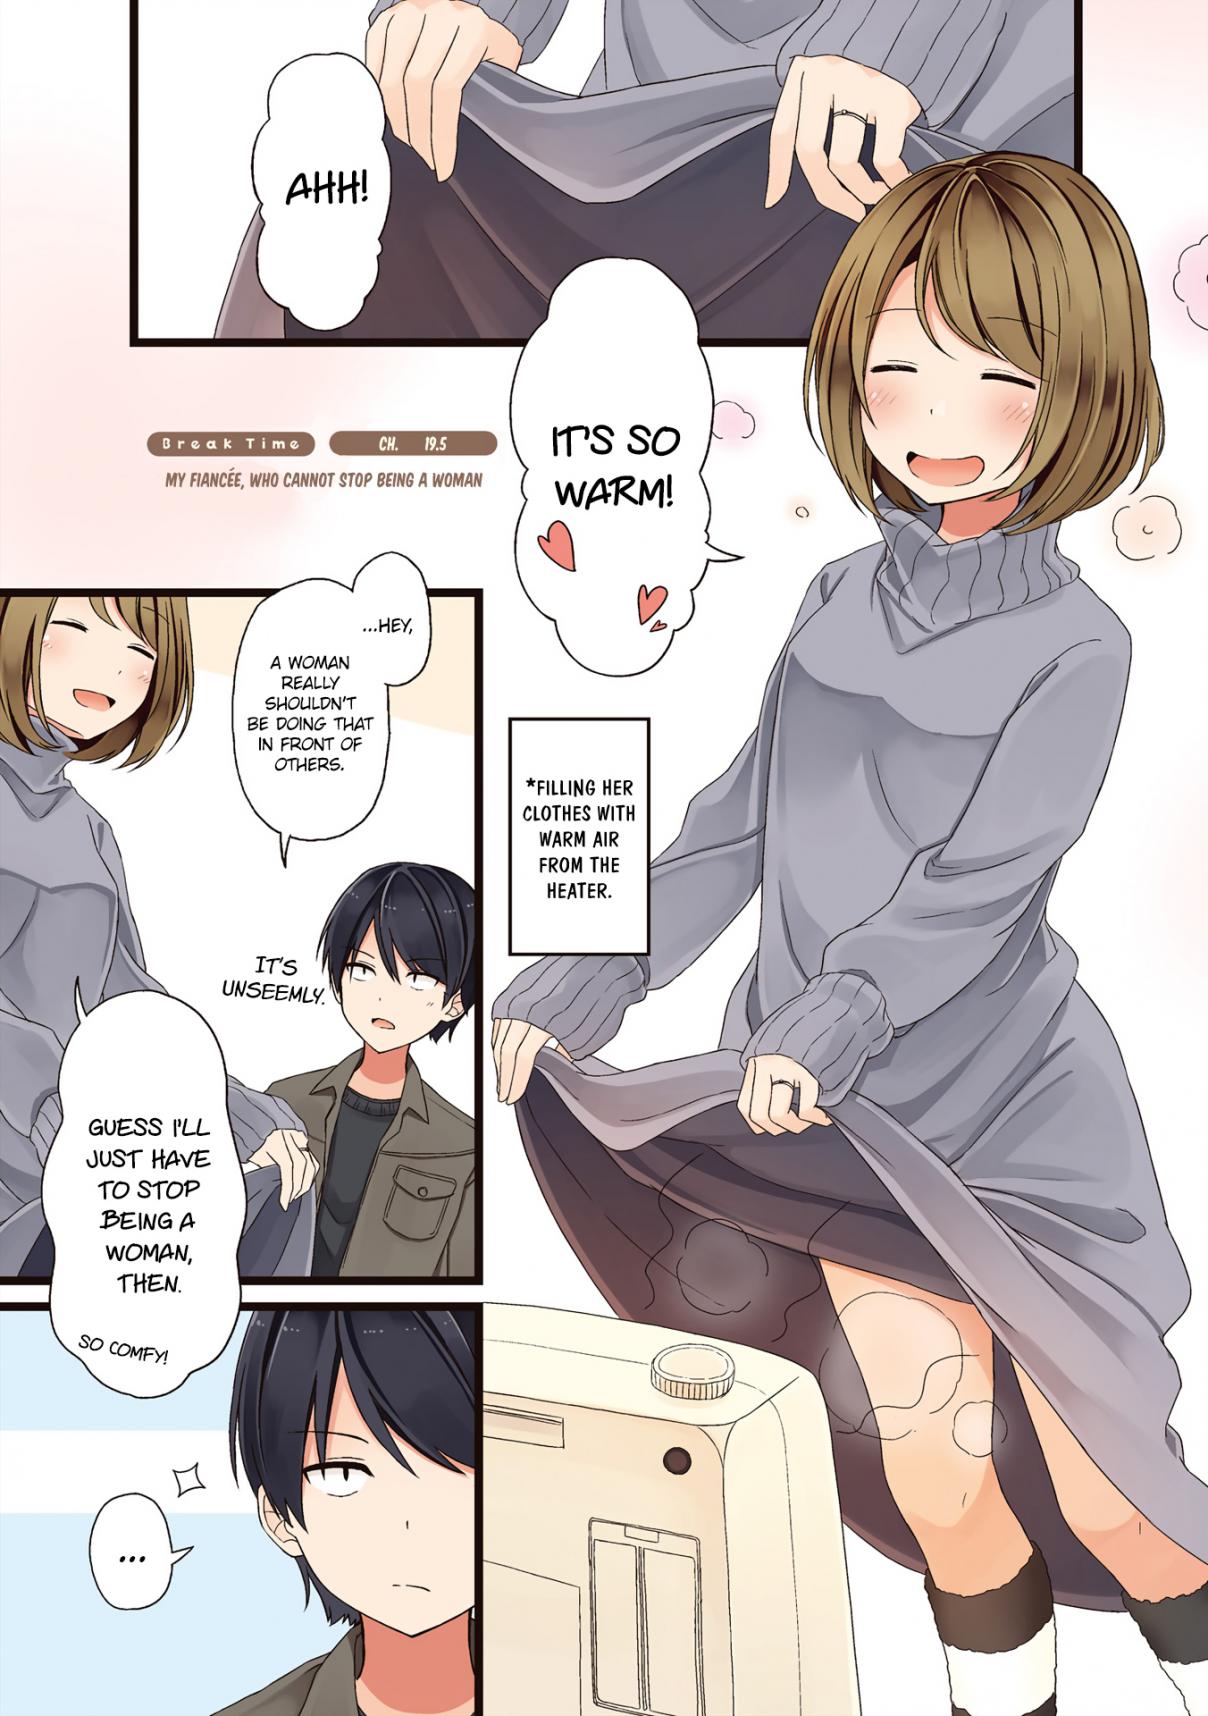 First Comes Love, Then Comes Marriage Vol. 1 Ch. 19.5 My Fiancée, Who Cannot Stop Being A Woman